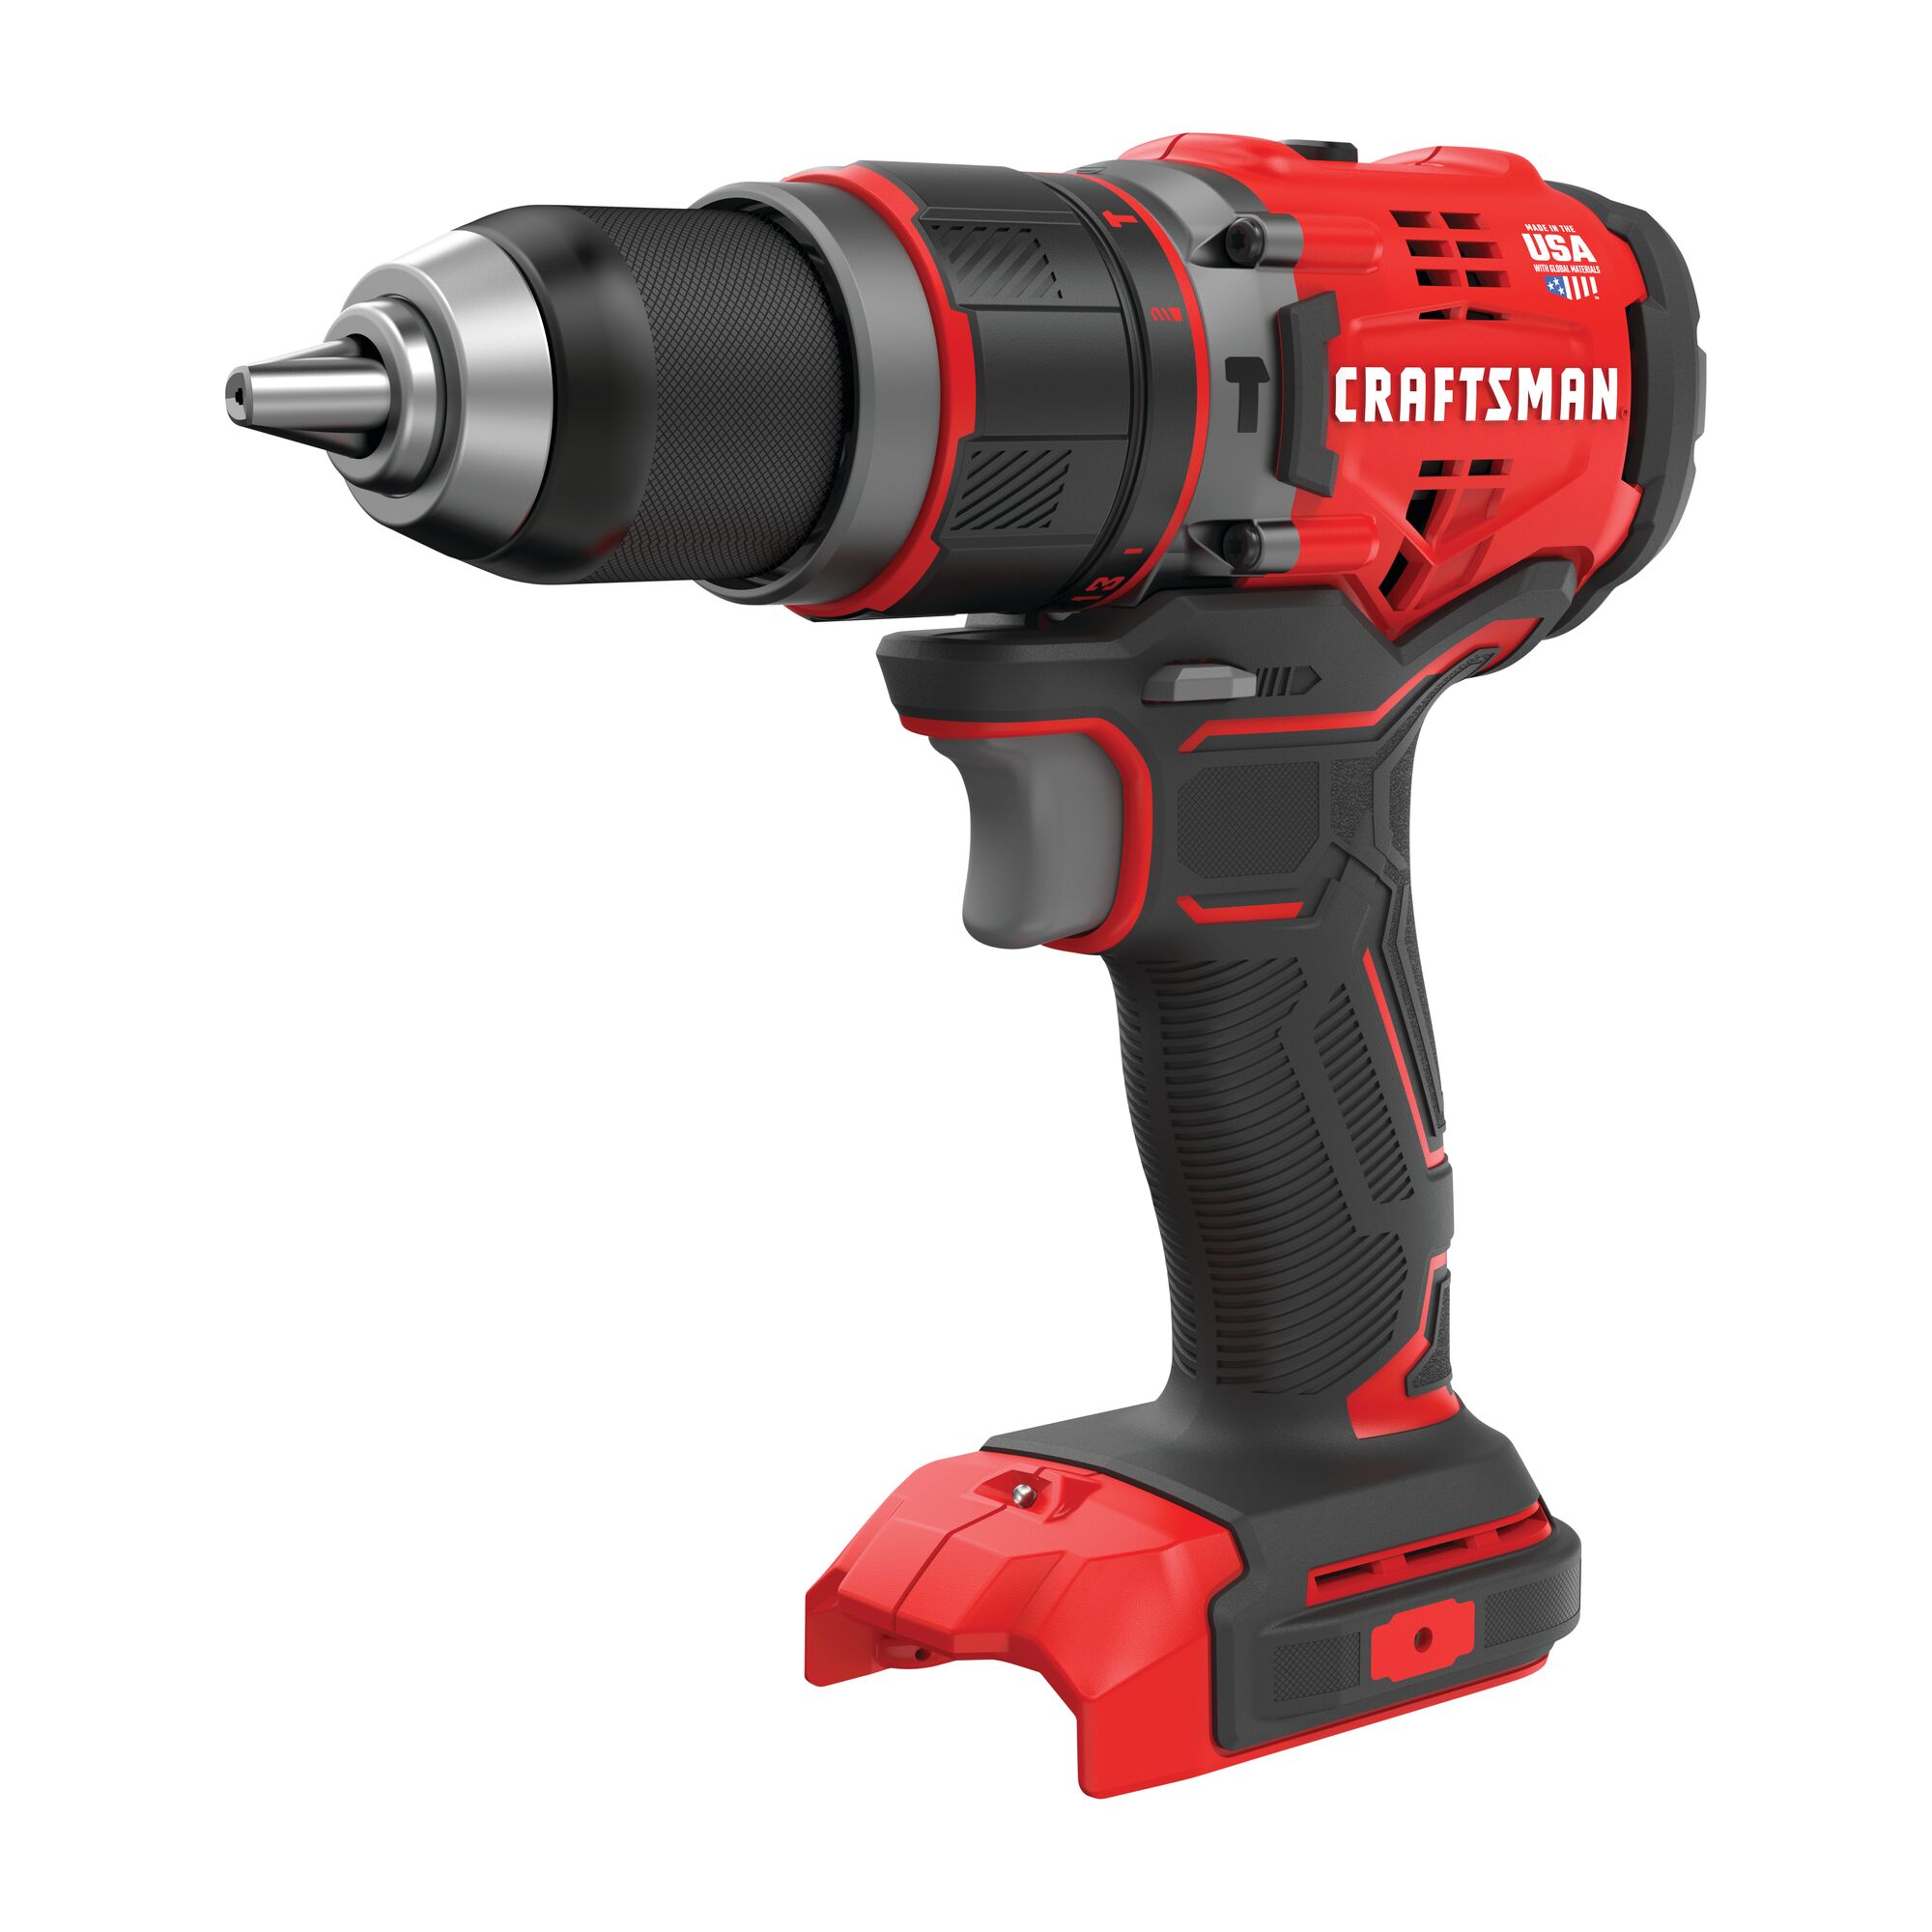 View of CRAFTSMAN Drills: Compact on white background